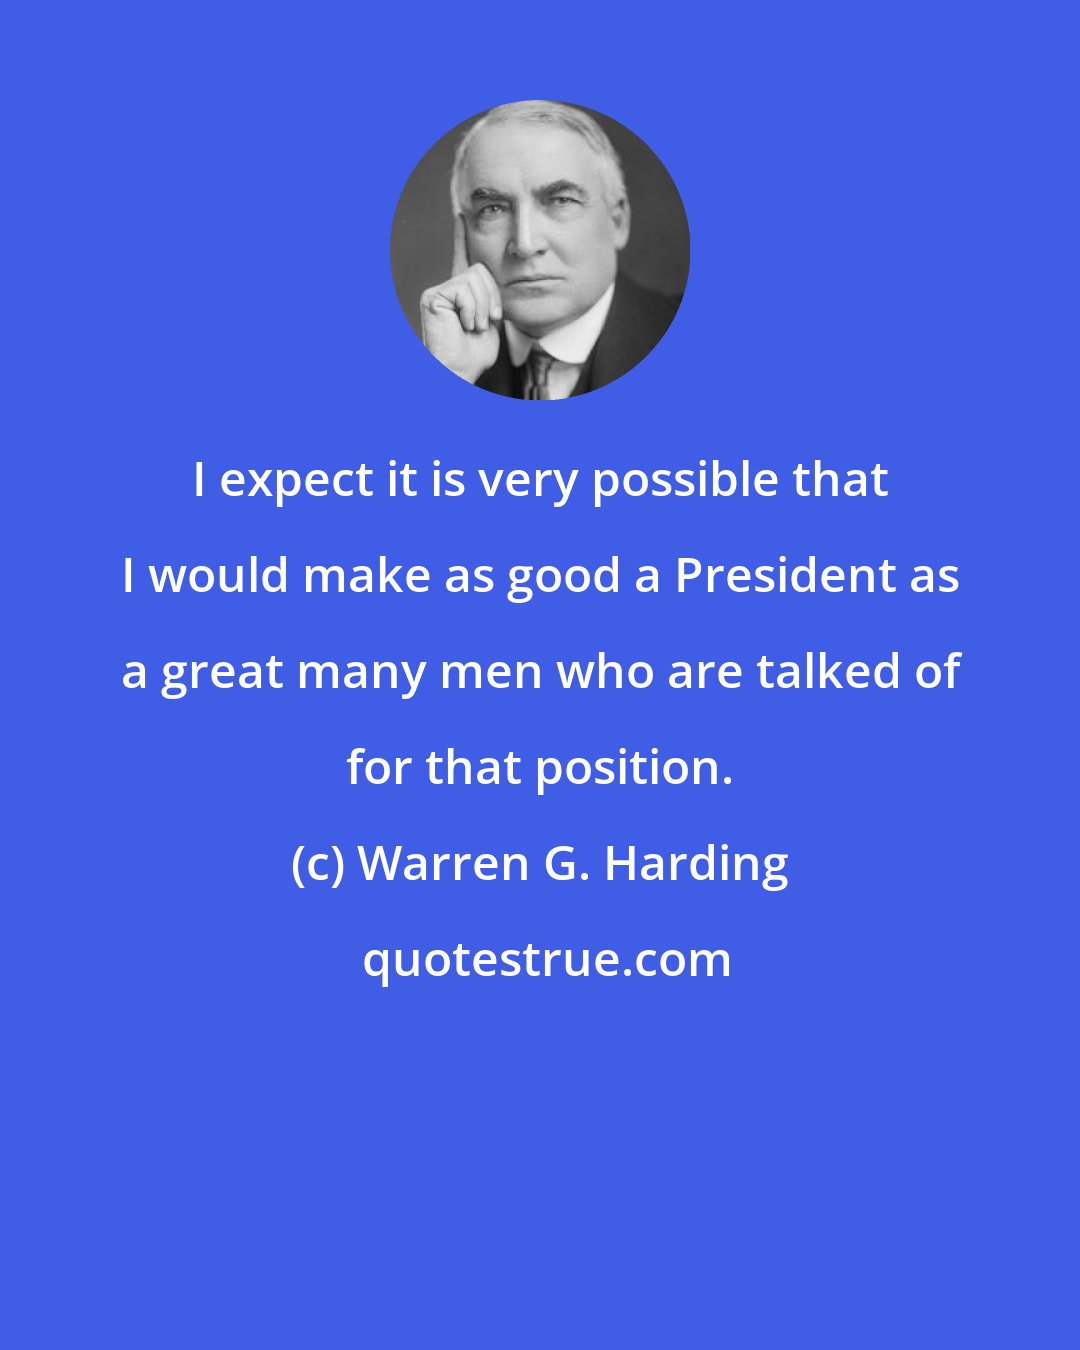 Warren G. Harding: I expect it is very possible that I would make as good a President as a great many men who are talked of for that position.